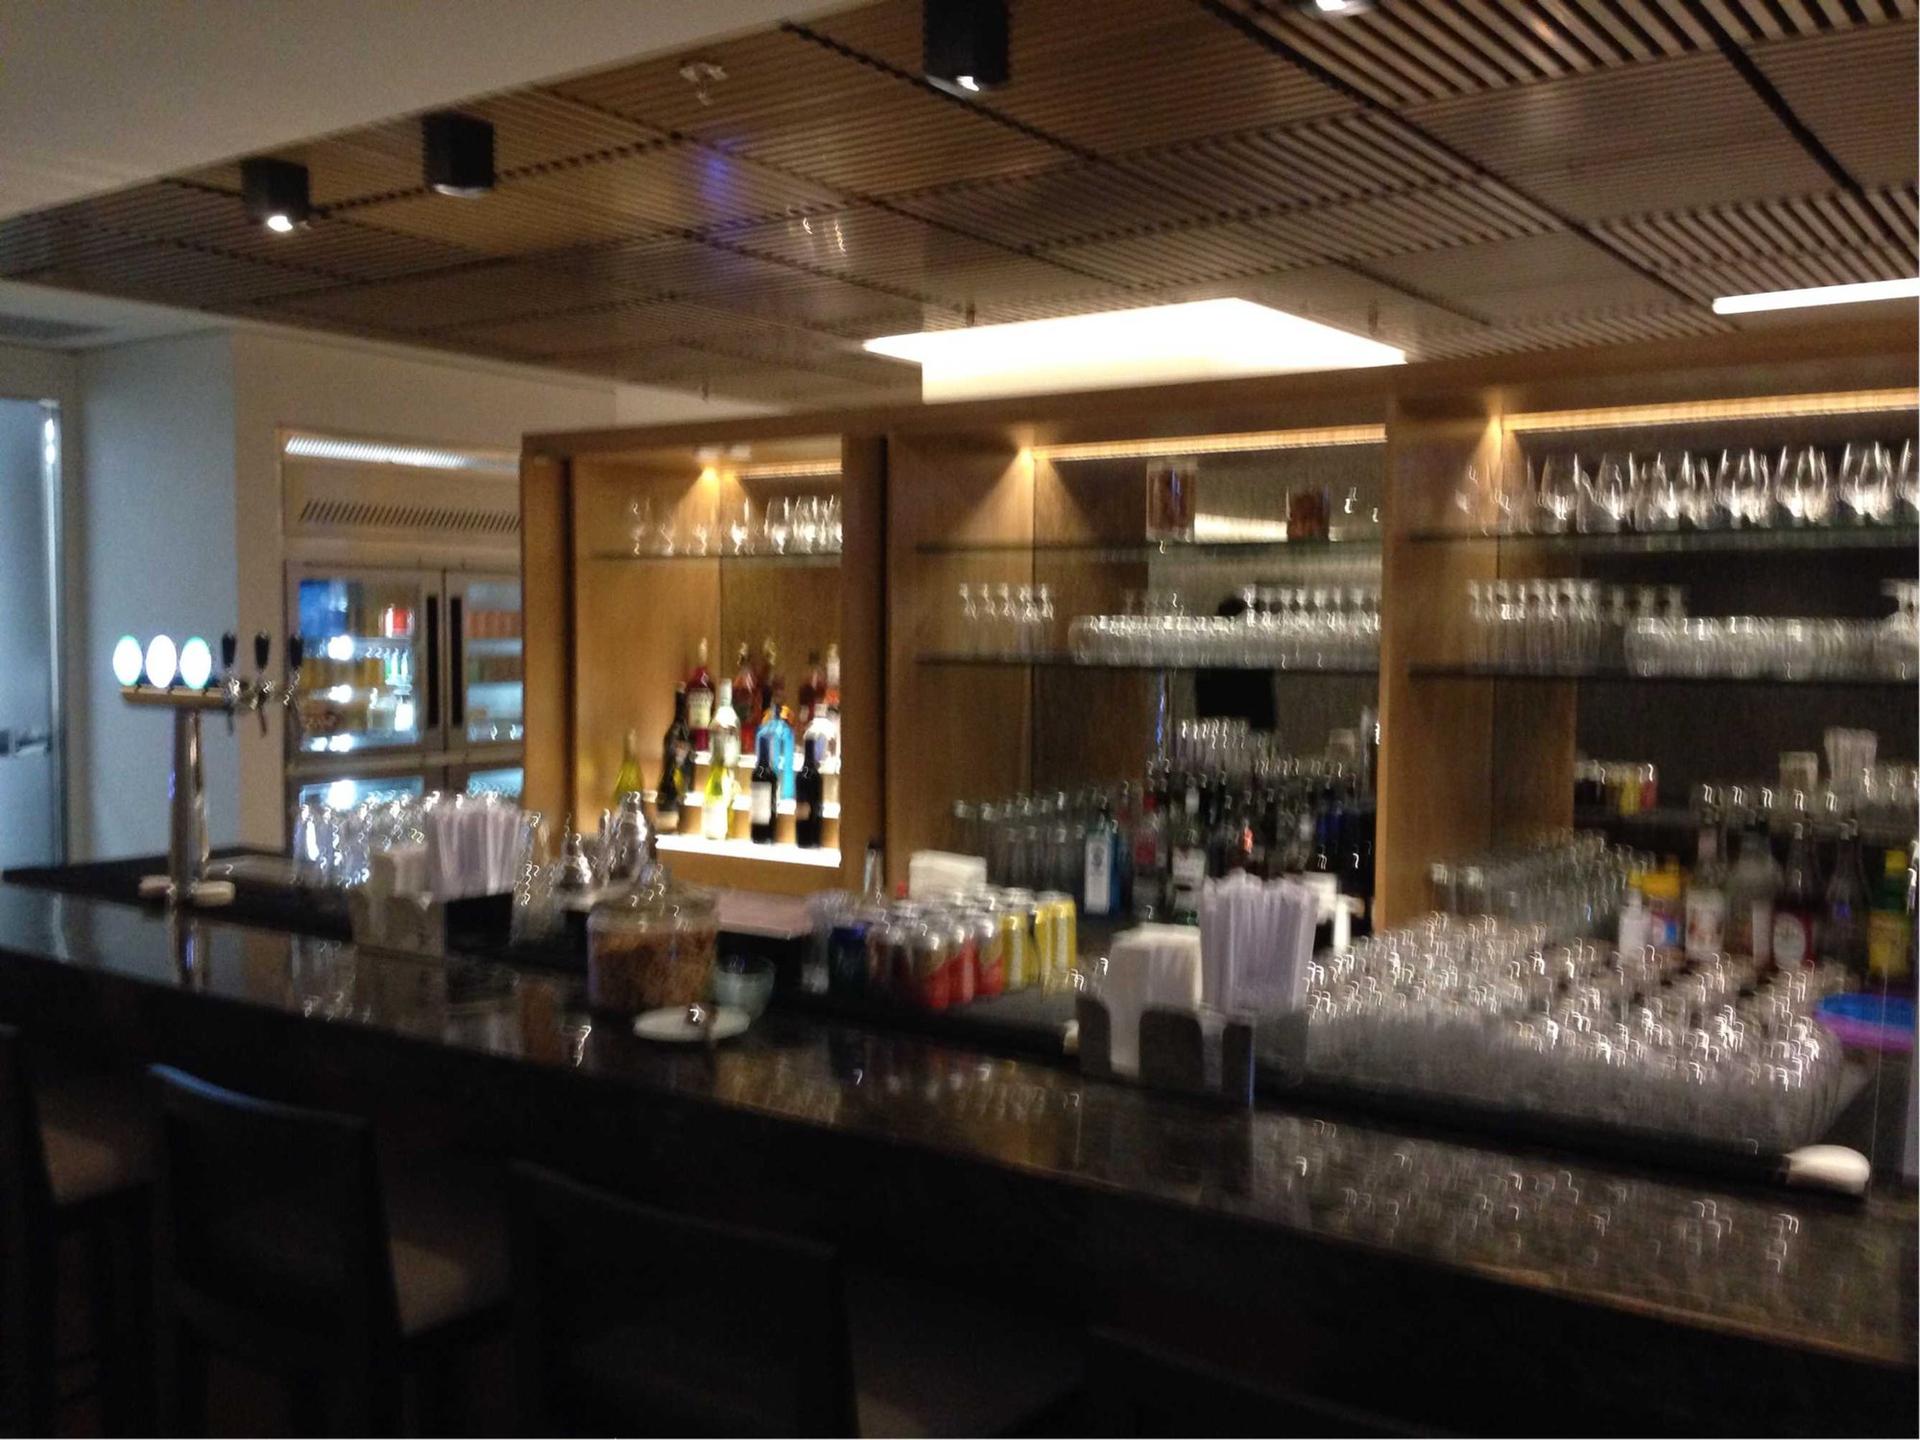 Singapore Airlines SilverKris Business Class Lounge image 67 of 68